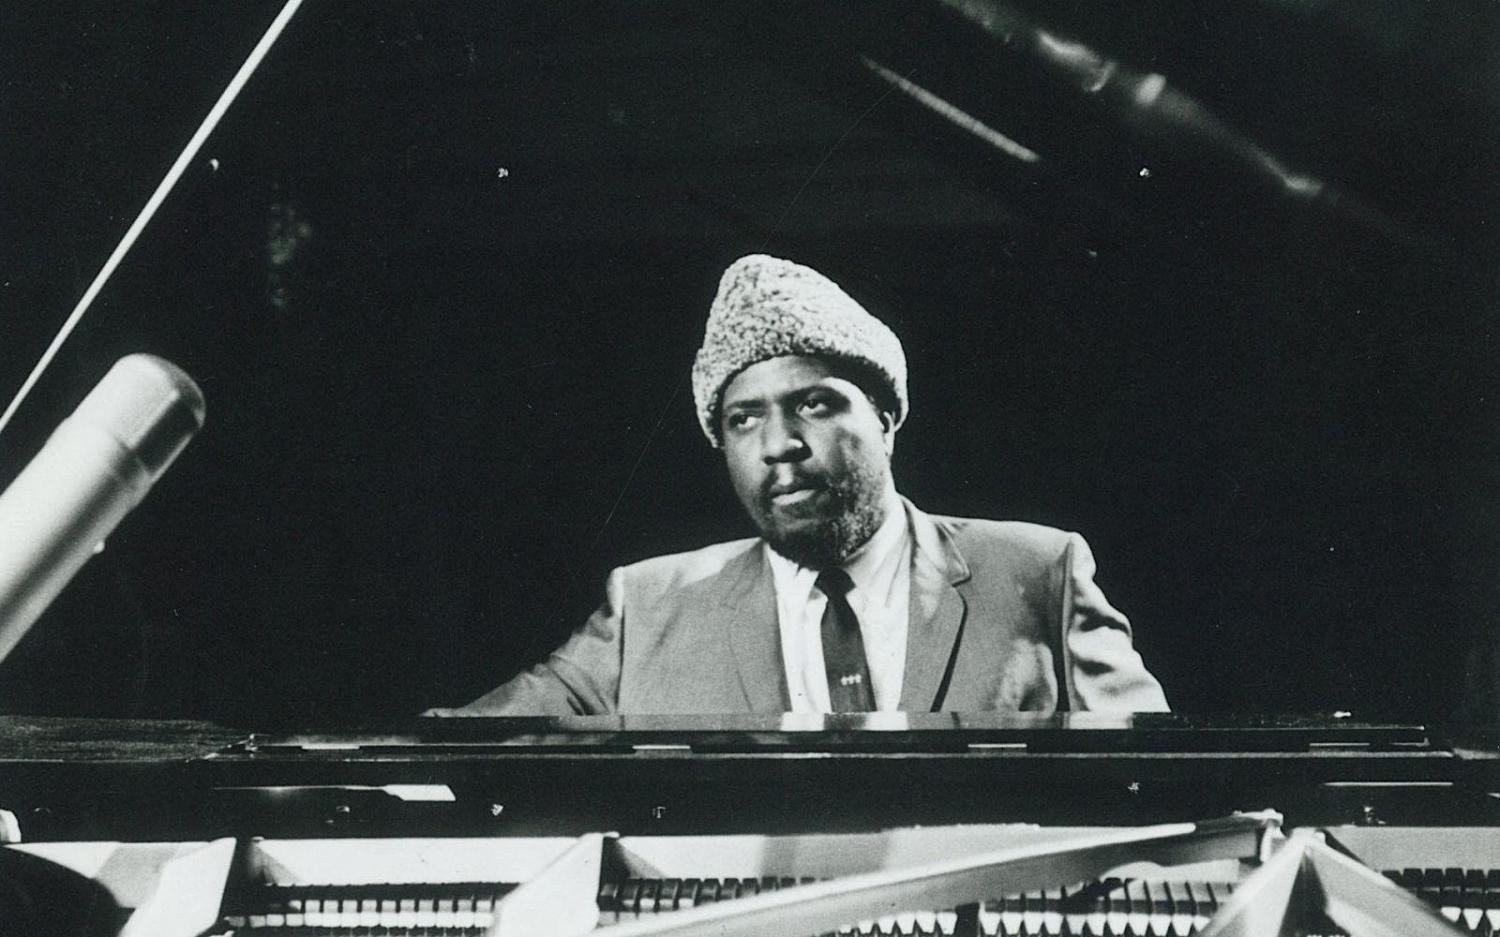 Four in One: Thelonious Monk Birthday Celebration in the Theater
Sat Oct 15, 9:30 PM - Sat Oct 15, 11:00 PM